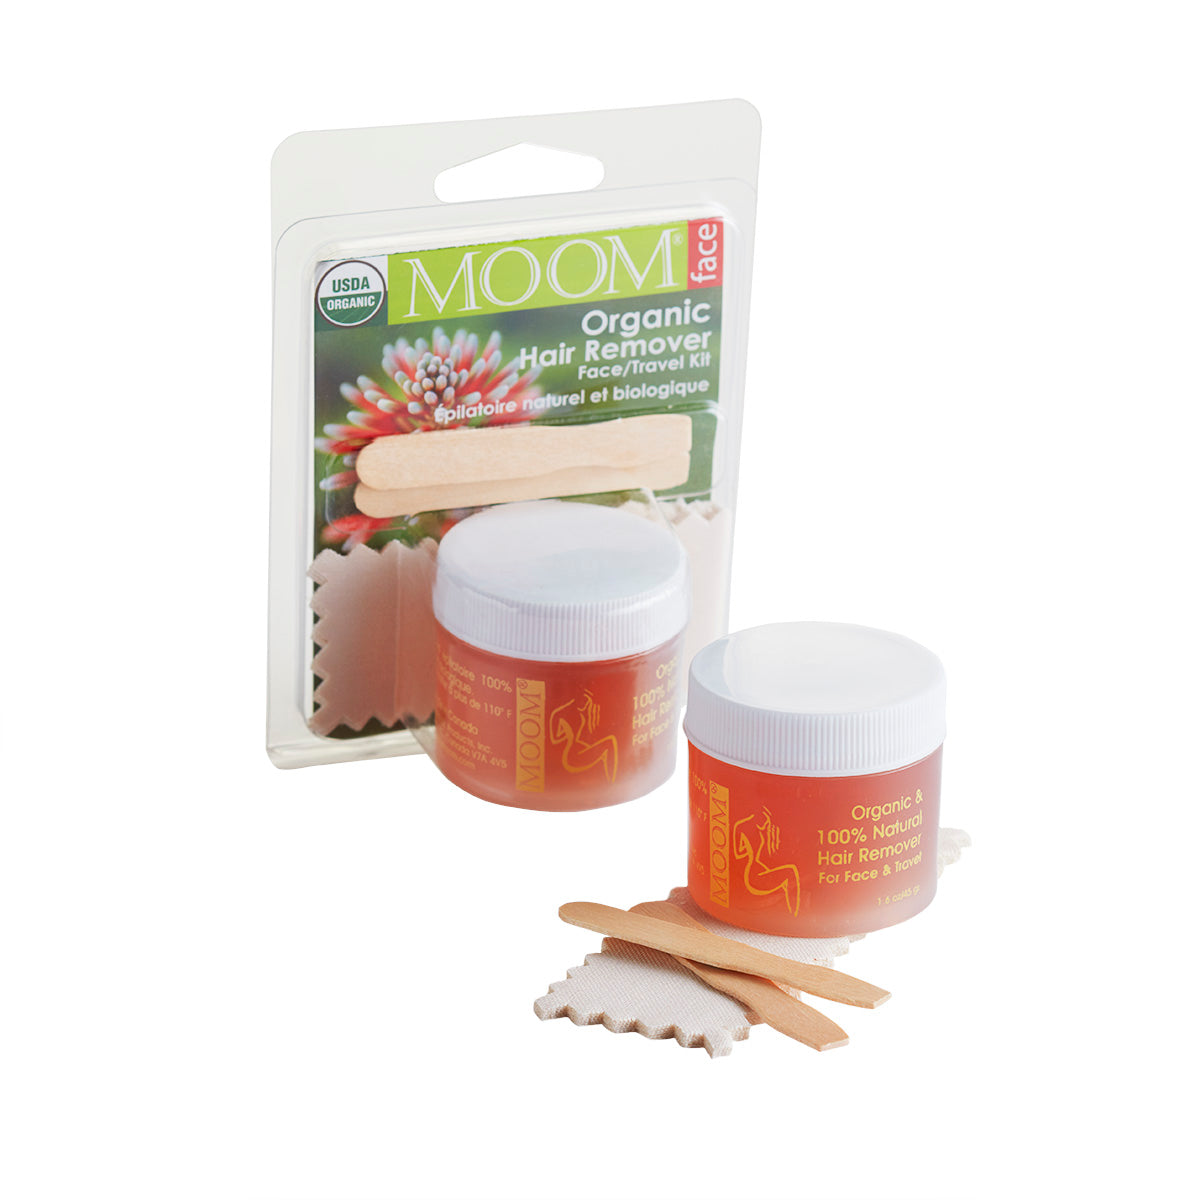 Moom Organic Hair Remover Kit with Avocado Face and Eyebrows 3 oz 85 G